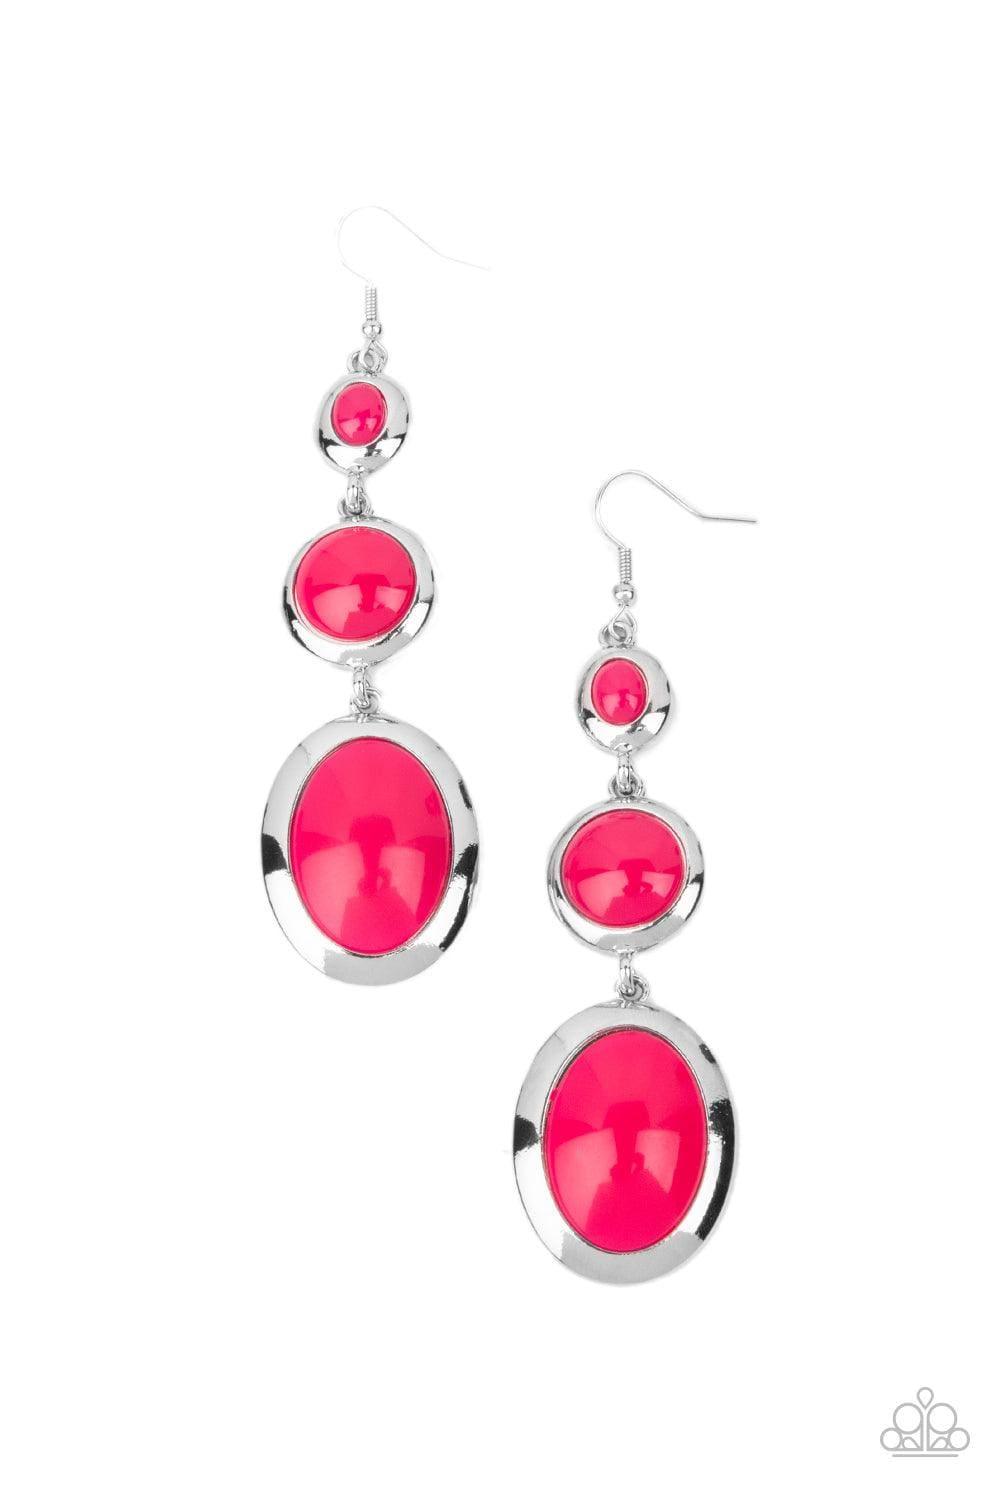 Paparazzi Accessories - Retro Reality - Pink Earrings - Bling by JessieK